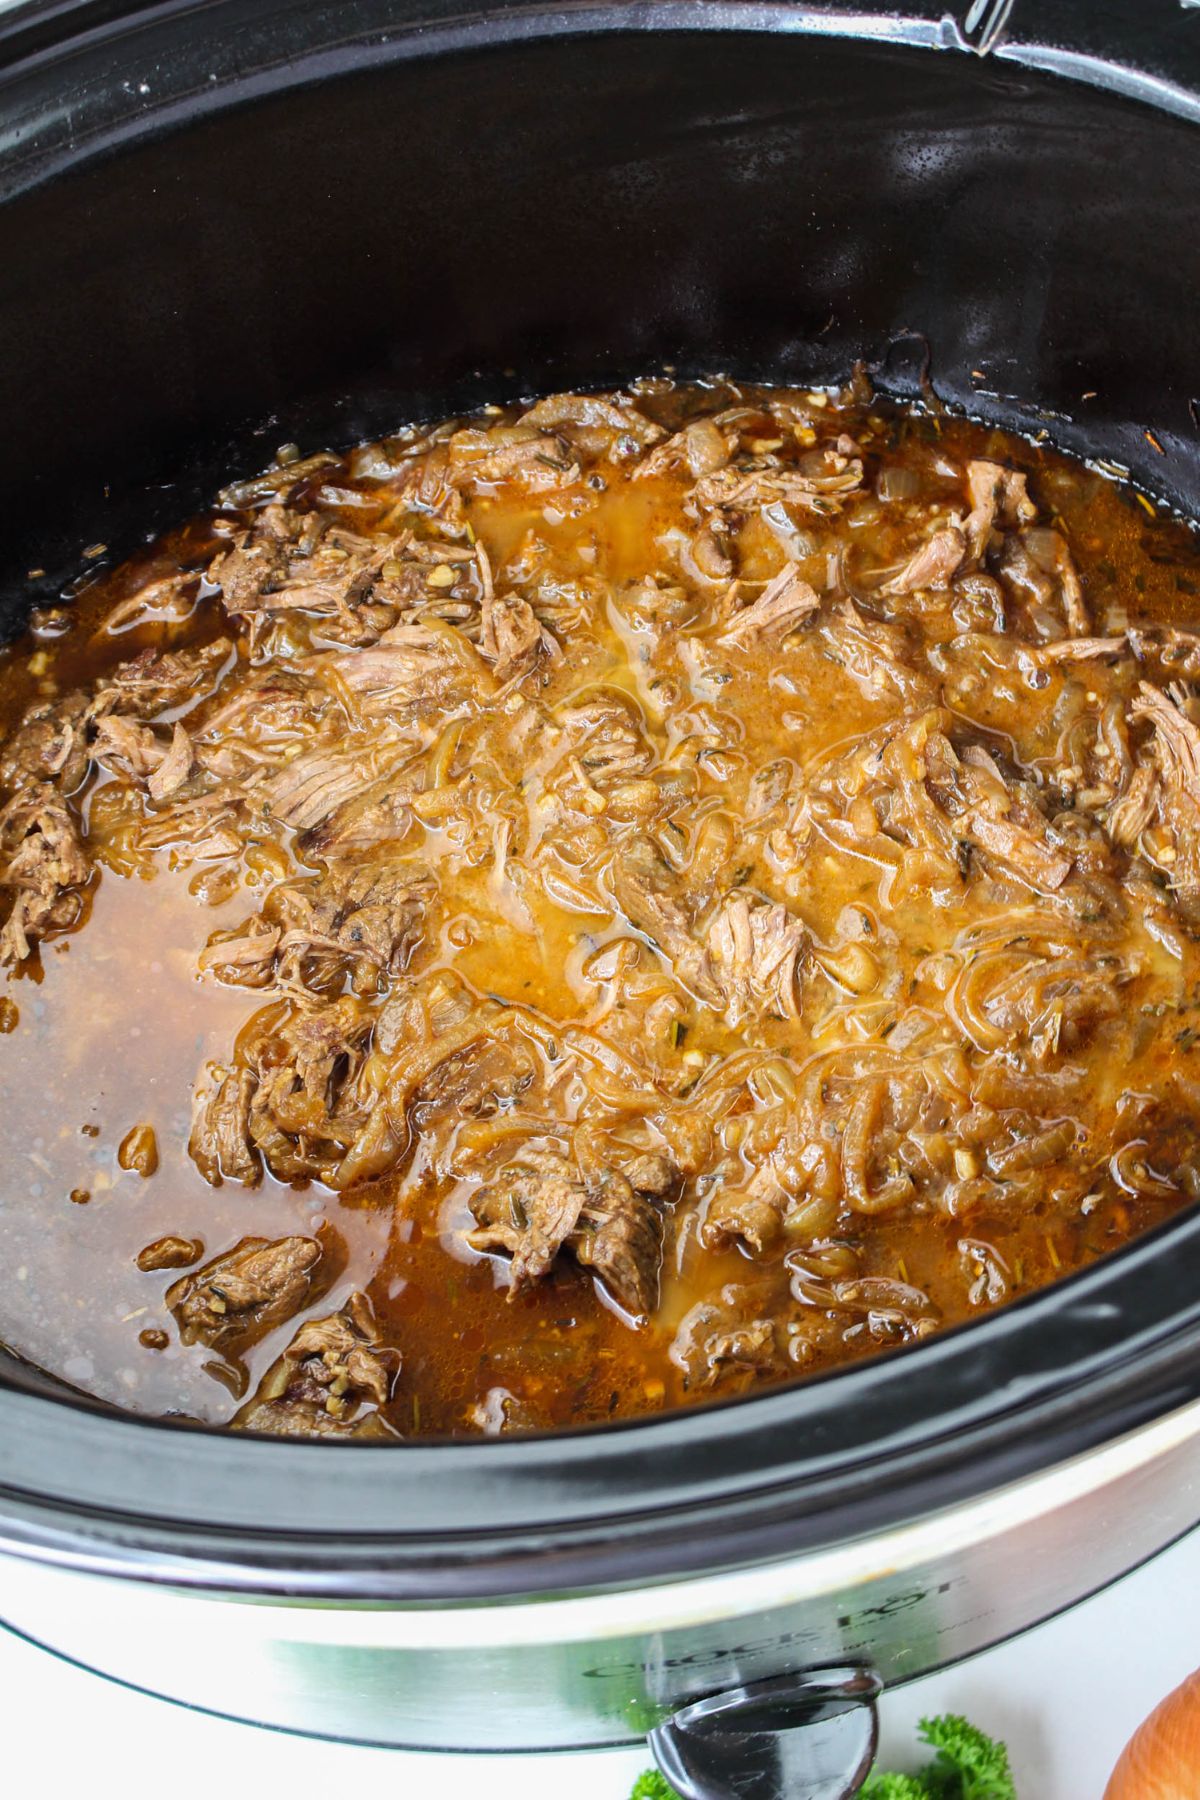 braised steak and onions in a slow cooker.